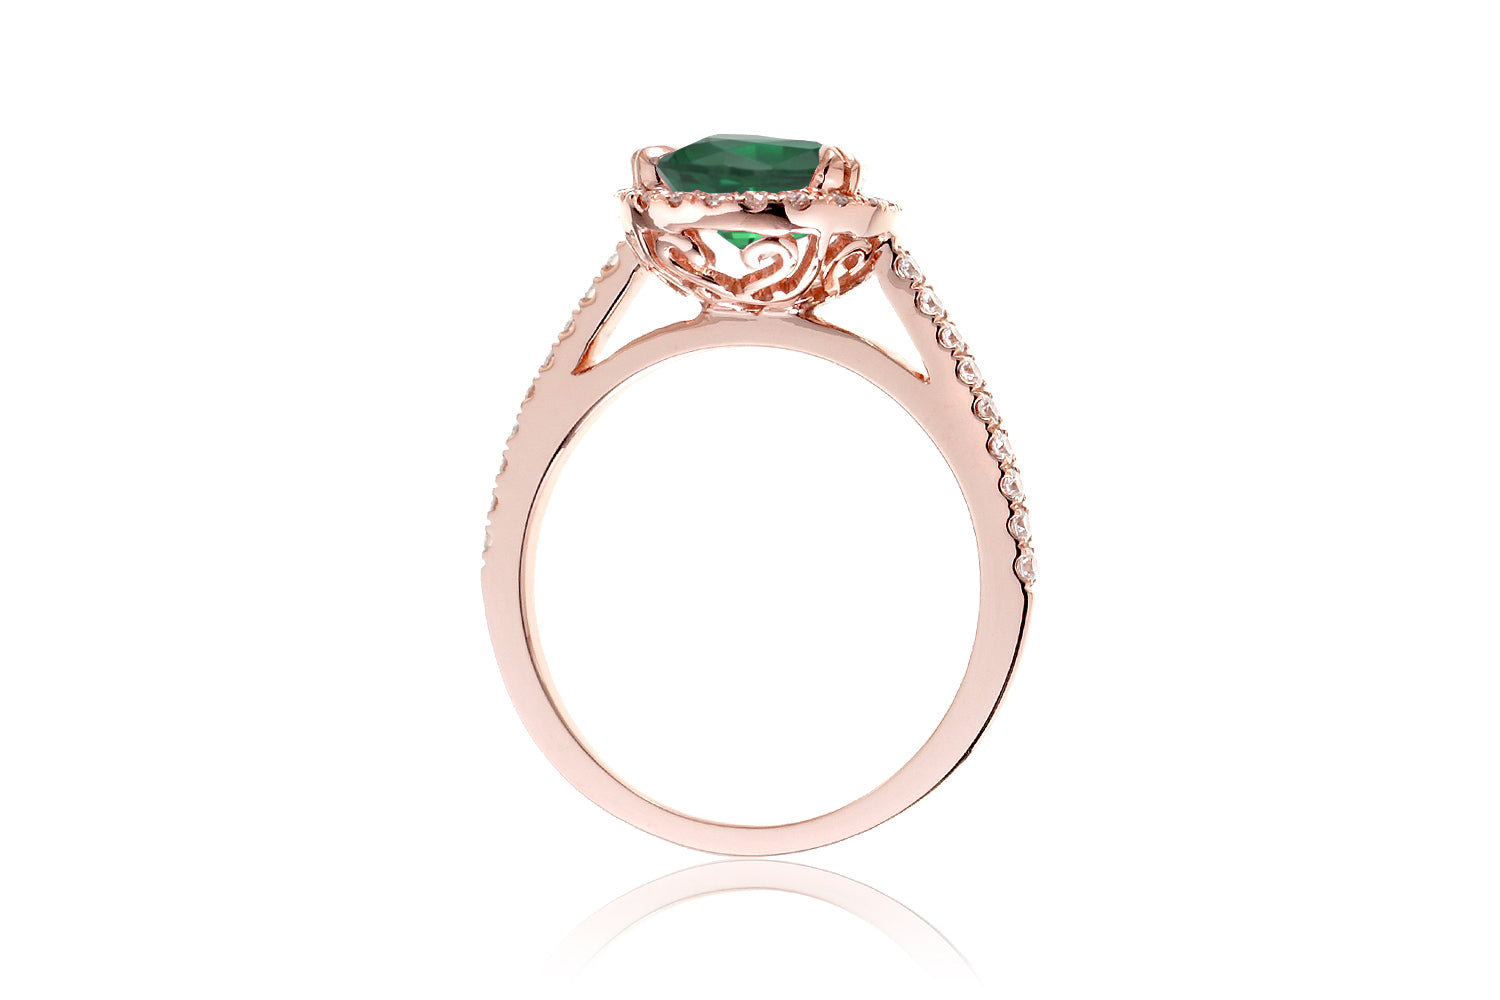 Pear green emerald diamond halo cathedral engagement ring rose gold - The Signature